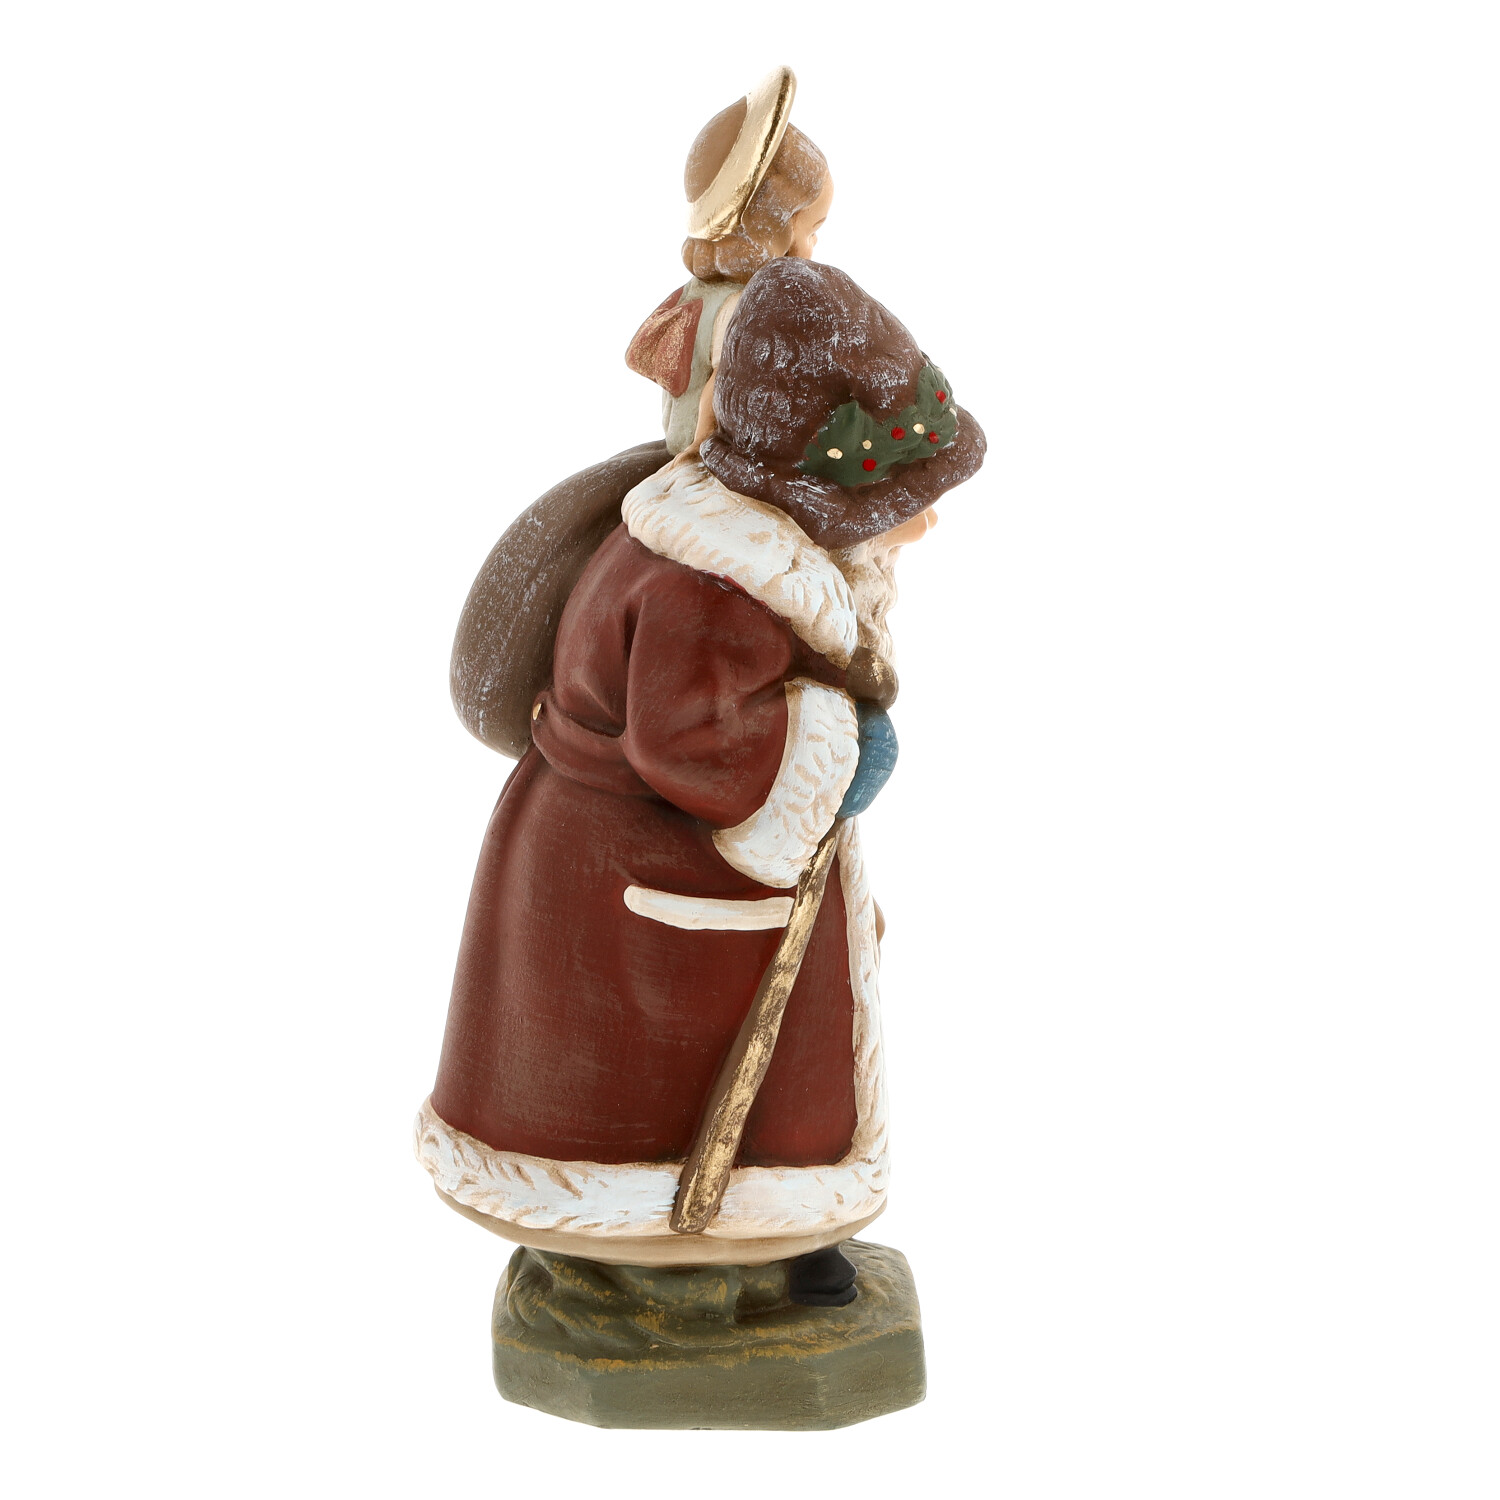 Santa with Christ child on shoulder - made in Germany